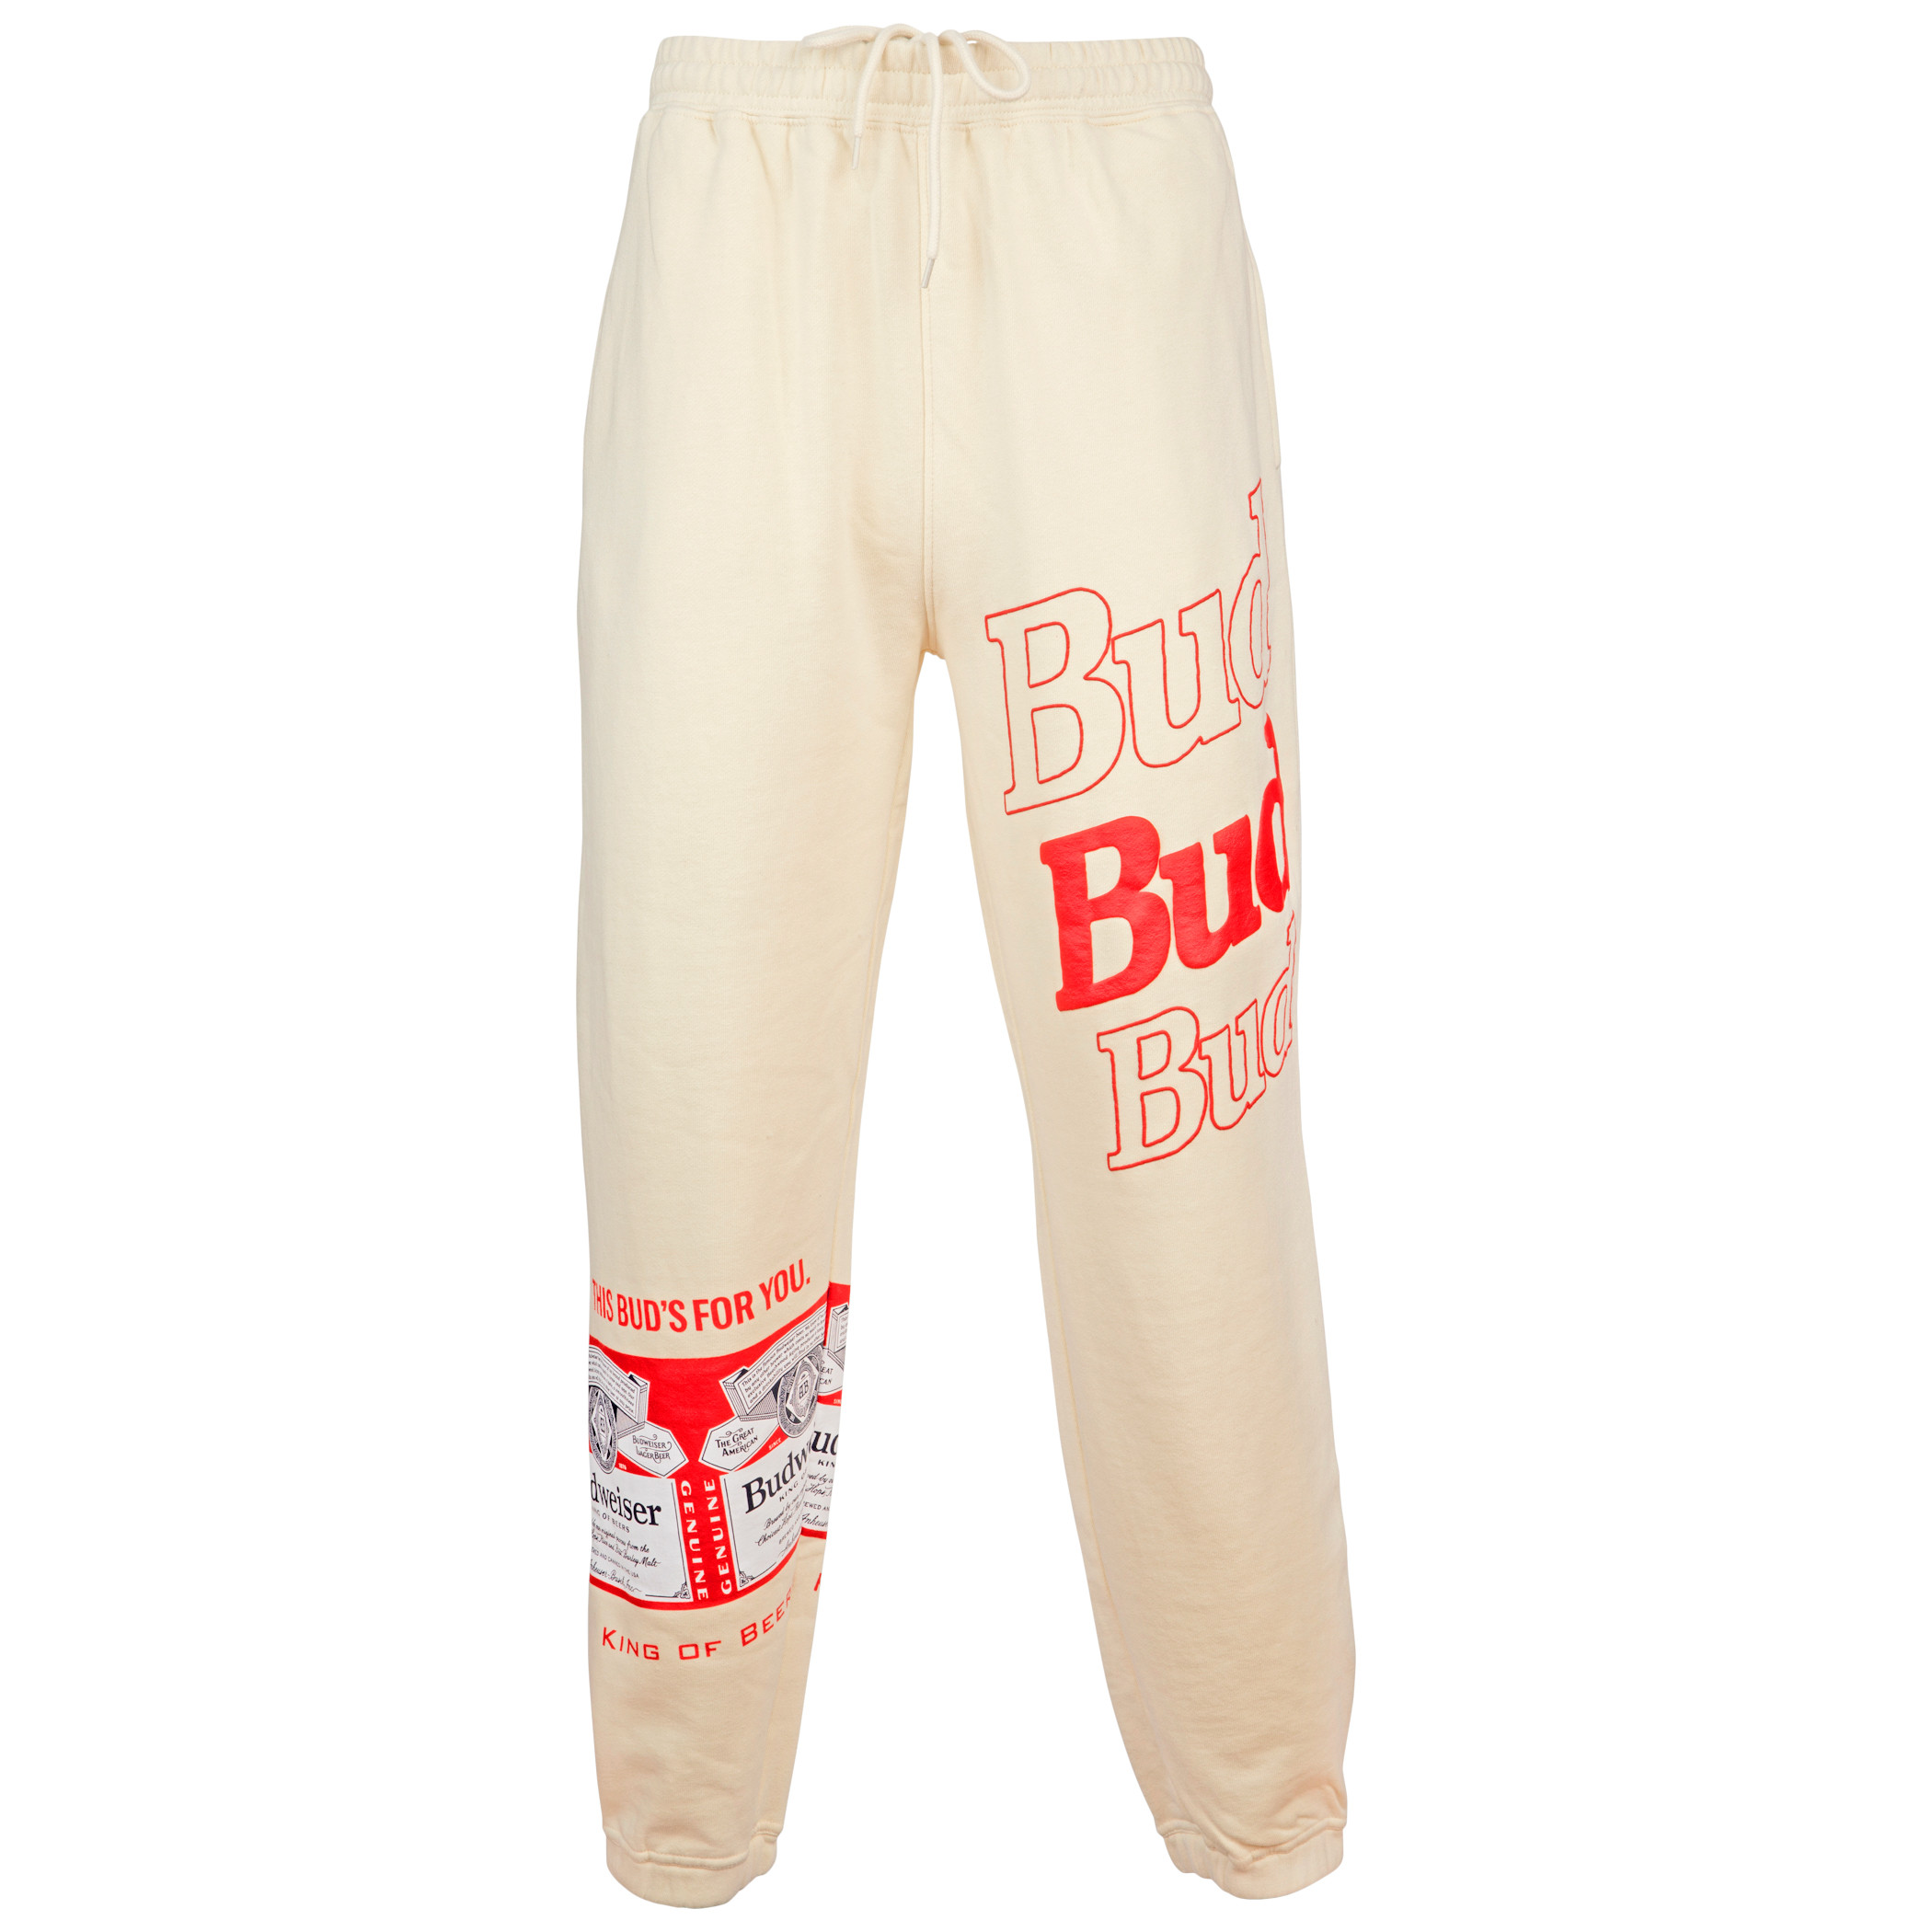 Budweiser This Bud's For You Fleece Sweatpant Joggers